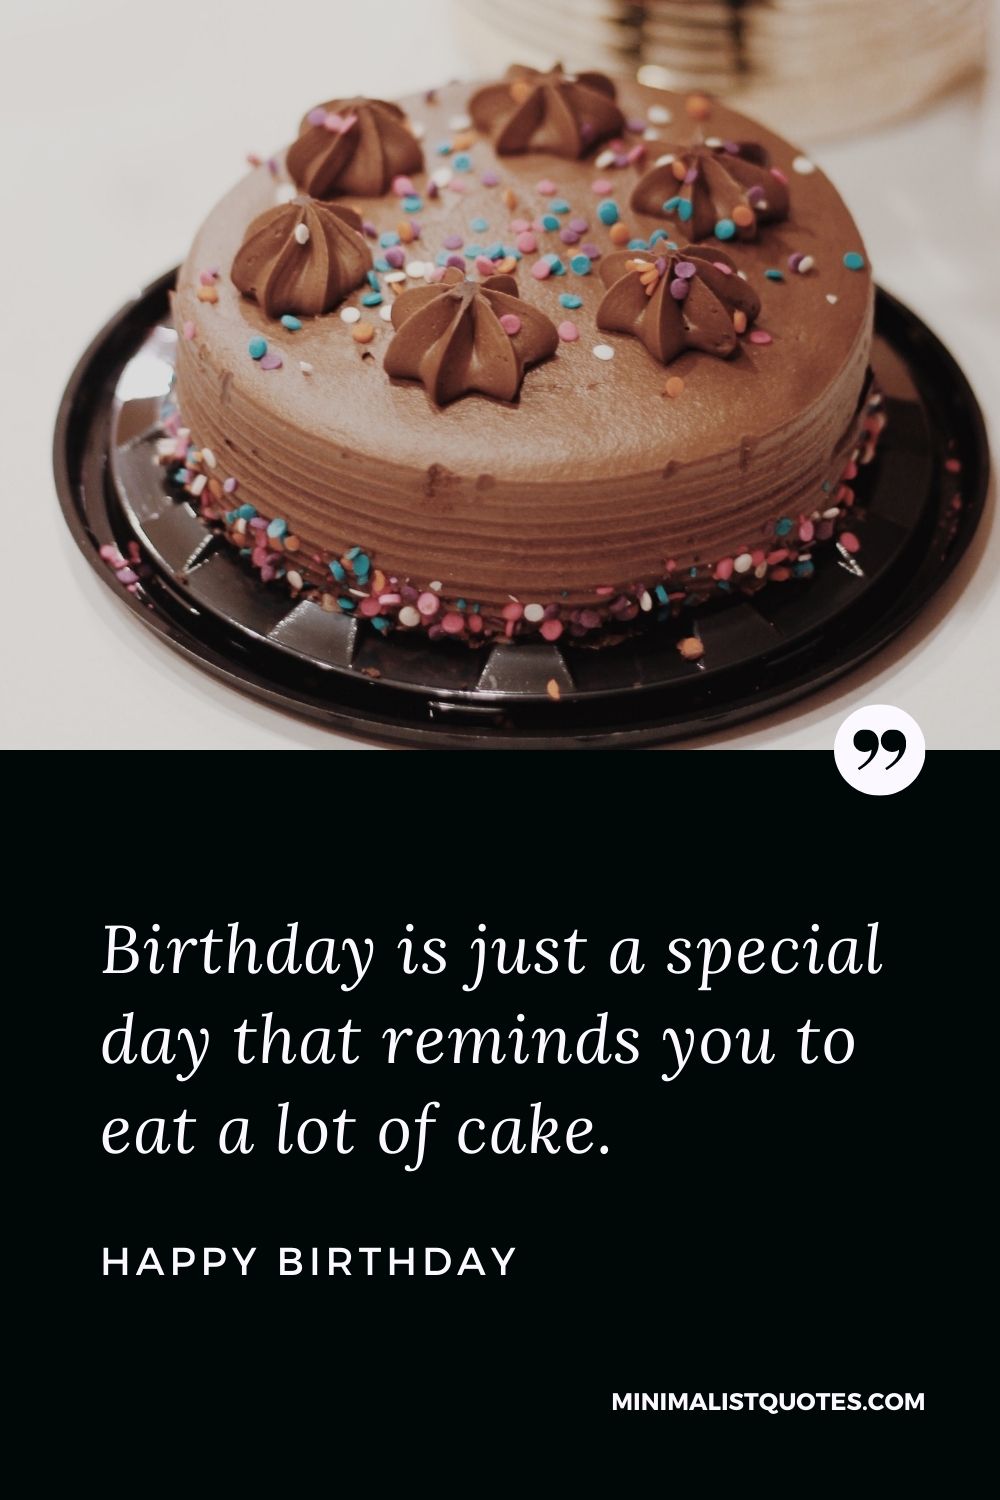 Happy Birthday Wishes - Birthday is just a special day that reminds you to eat a lot of cake.